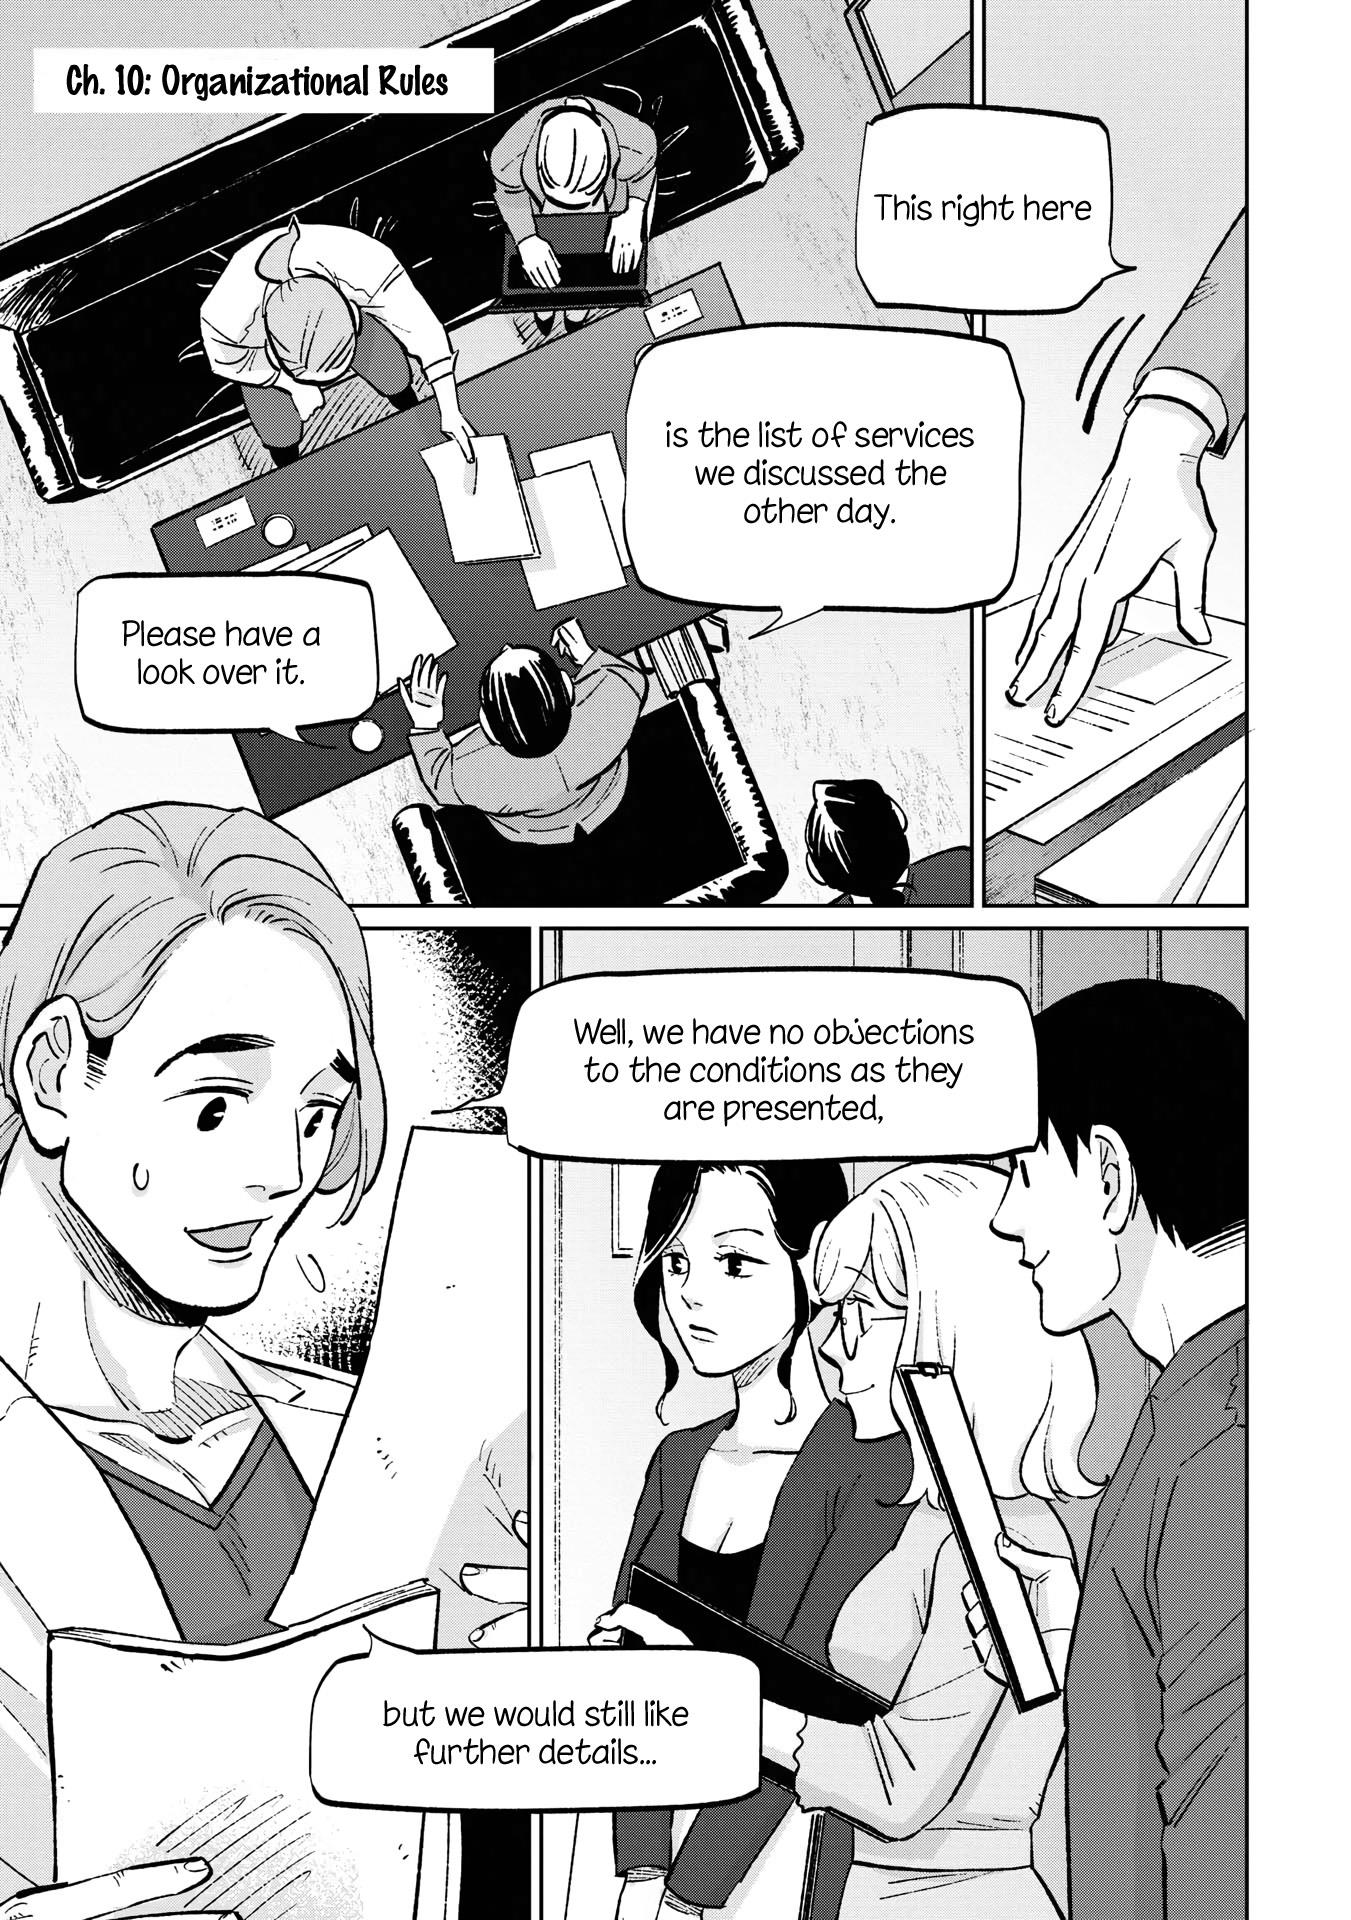 Black & White Vol.2 Chapter 10: Organizational Rules - Picture 1